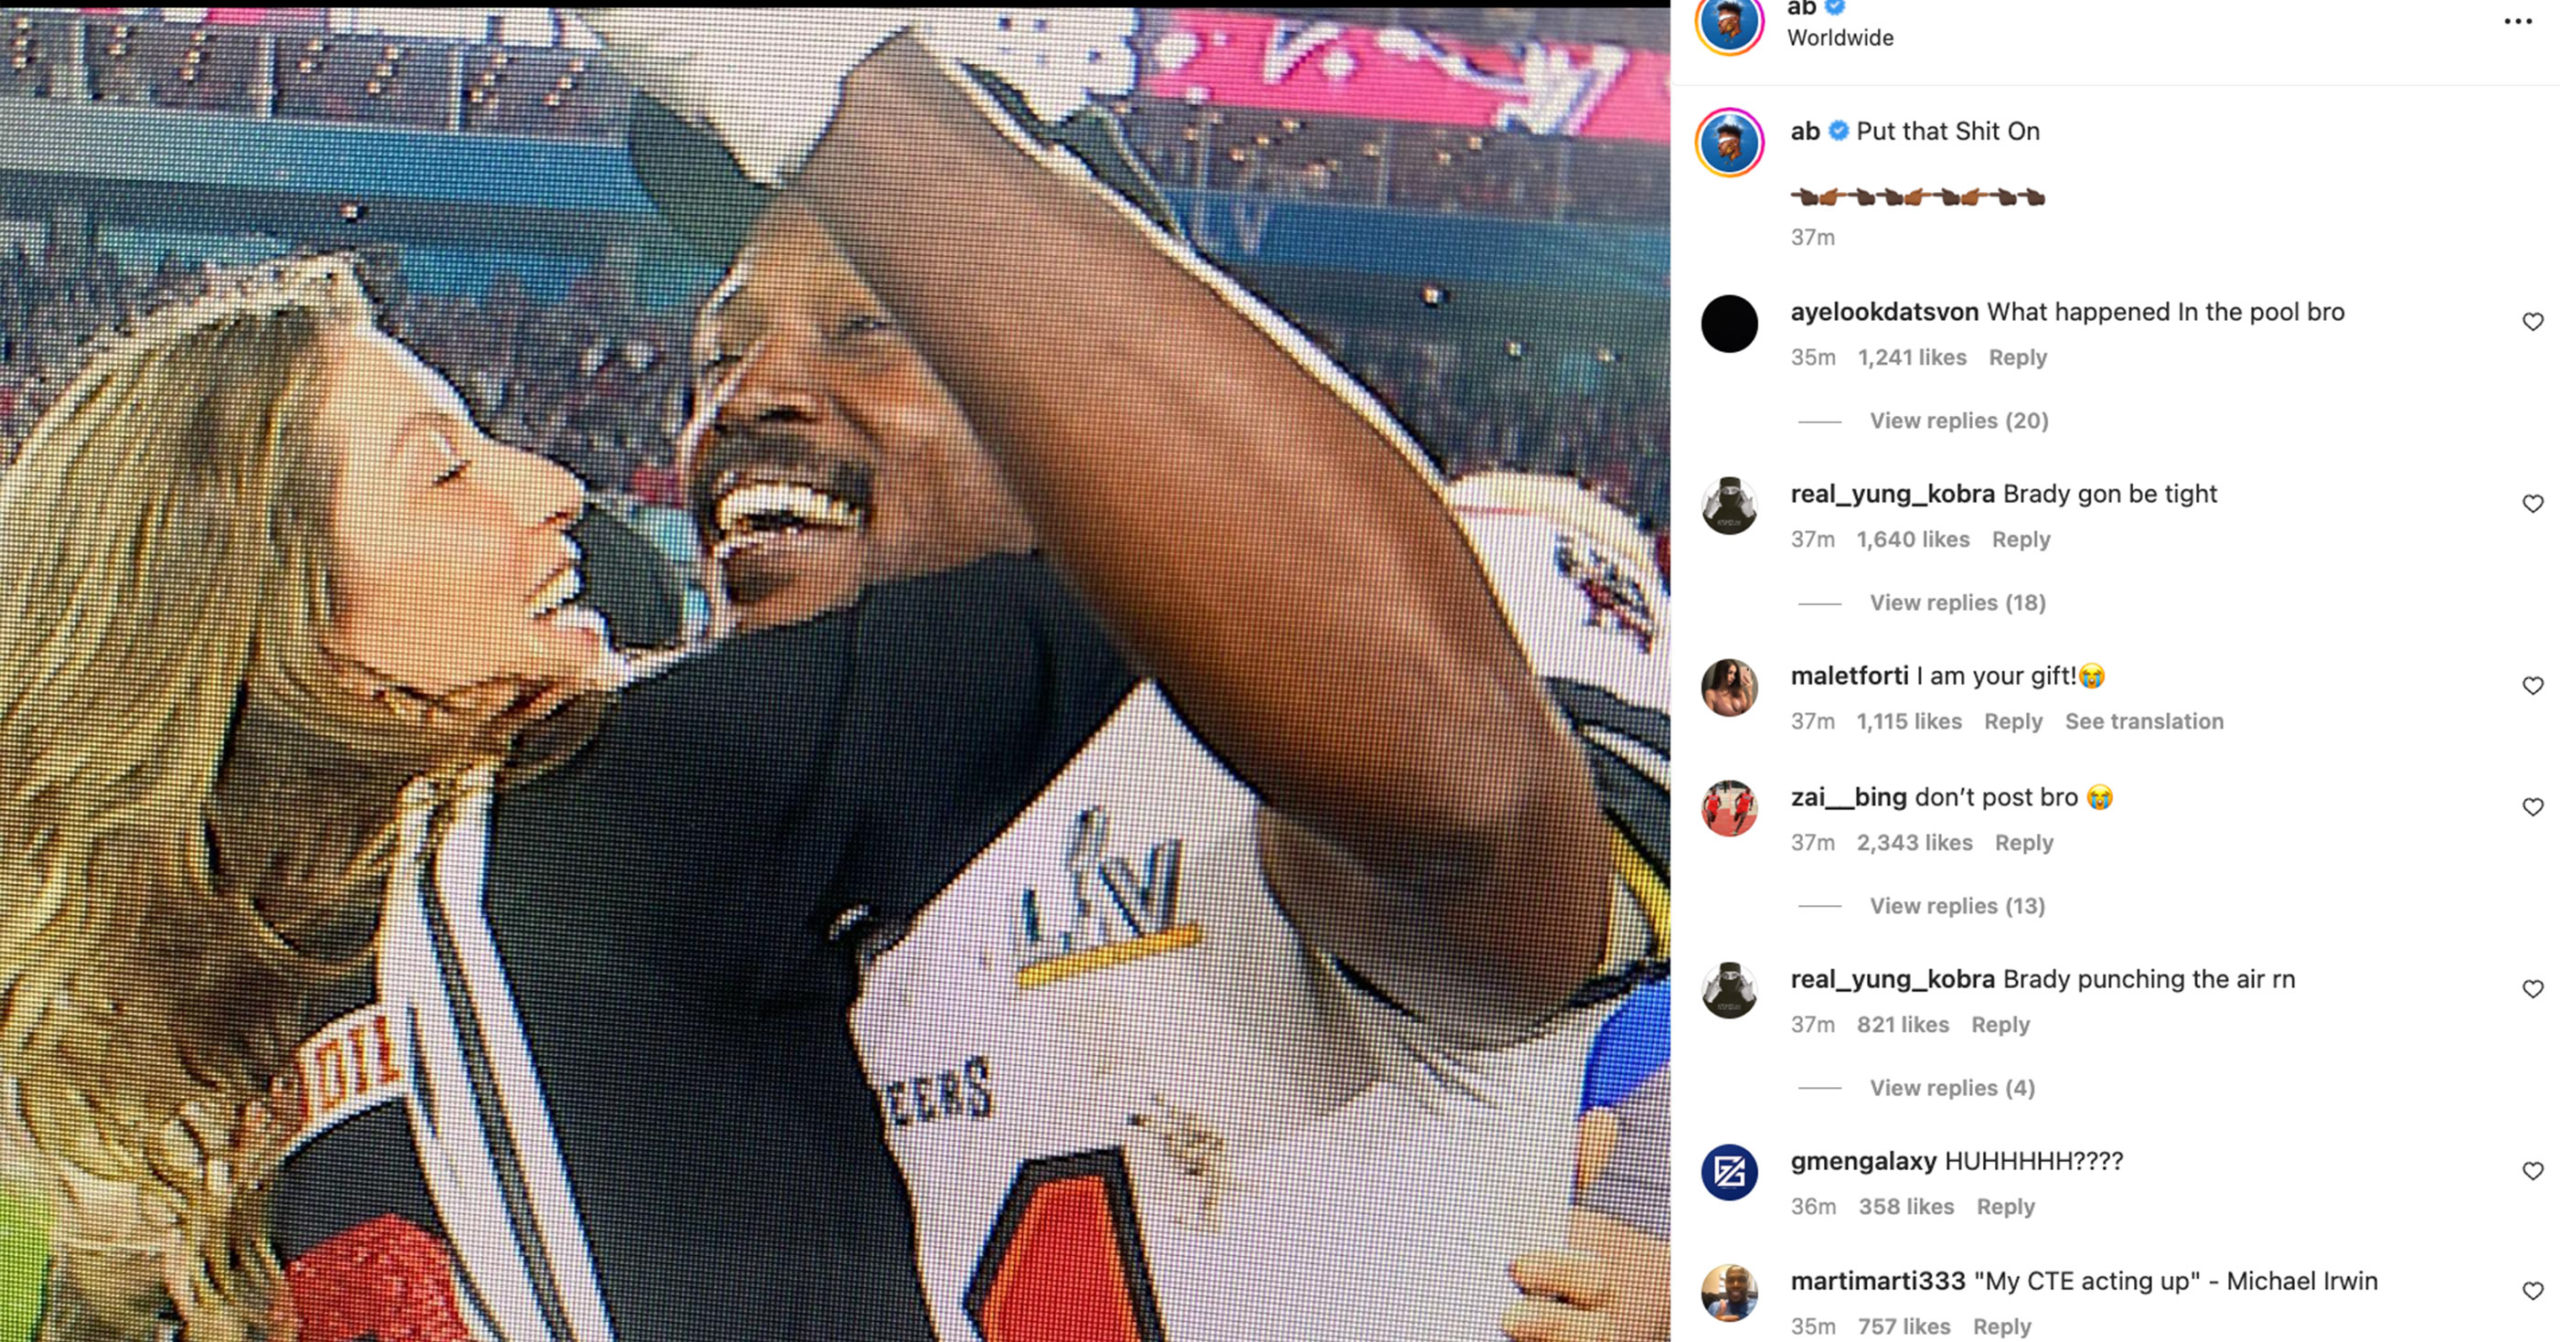 Antonio Brown's beef with Tom Brady continues as troubled NFL star shares  bizarre photoshopped nude photo of Gisele